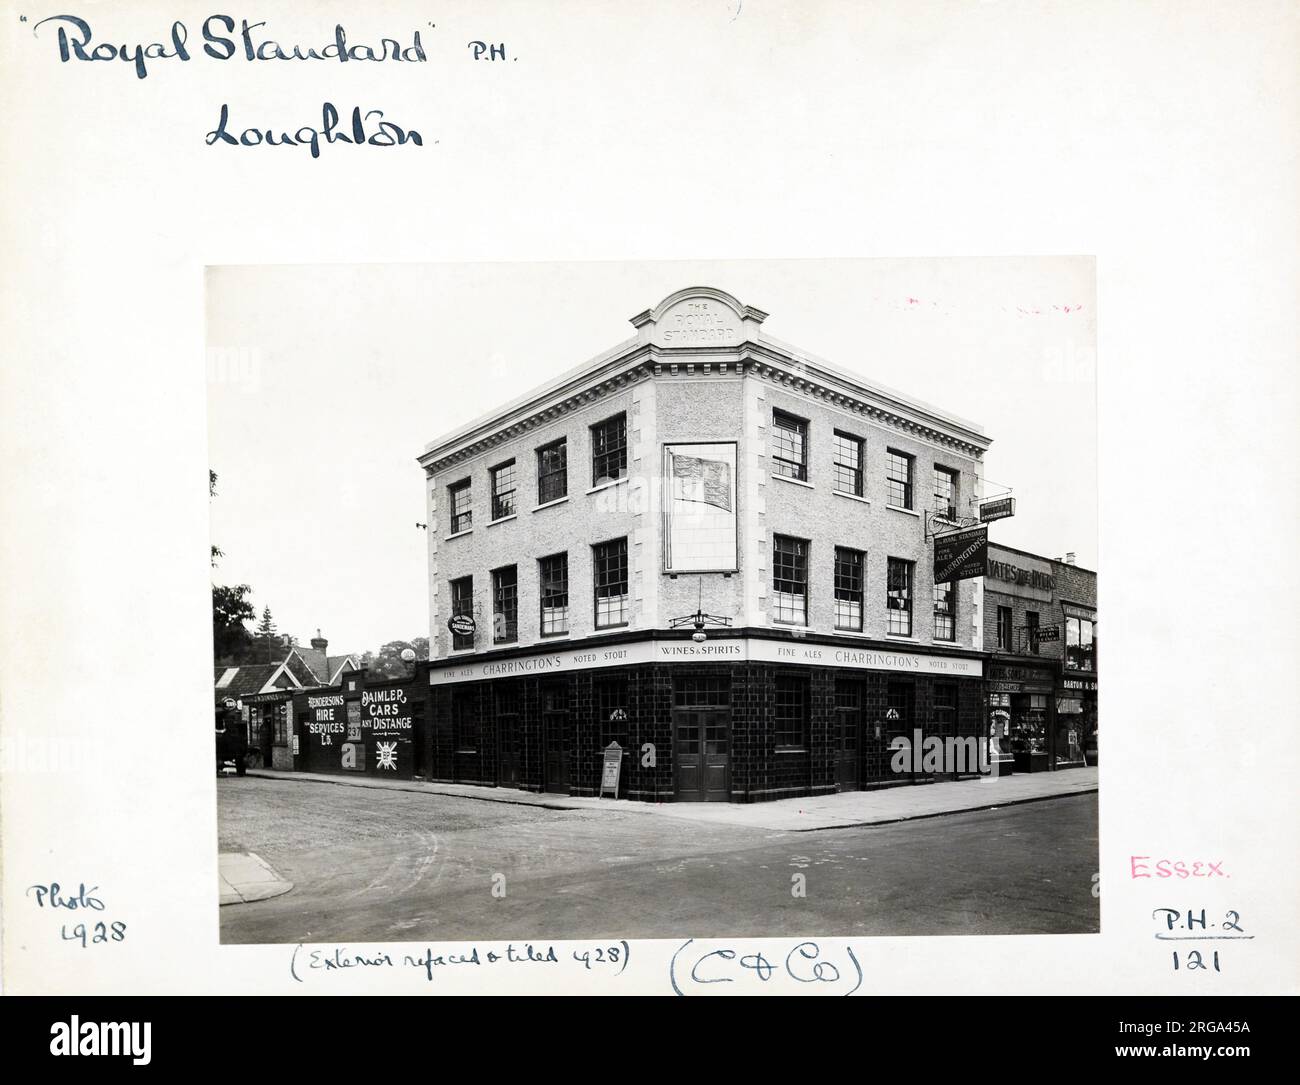 Photograph of Royal Standard PH, Loughton, Essex. The main side of the print (shown here) depicts: Corner on view of the pub.  The back of the print (available on request) details: Trading Record 1924 . 1962 for the Royal Standard, Loughton, Essex IG10 4BE. As of July 2018 . Renamed Luxe . Now closed after council revoked late night liecence. The leaseholders have converted the premises to a gastro.pub in former name. Stock Photo